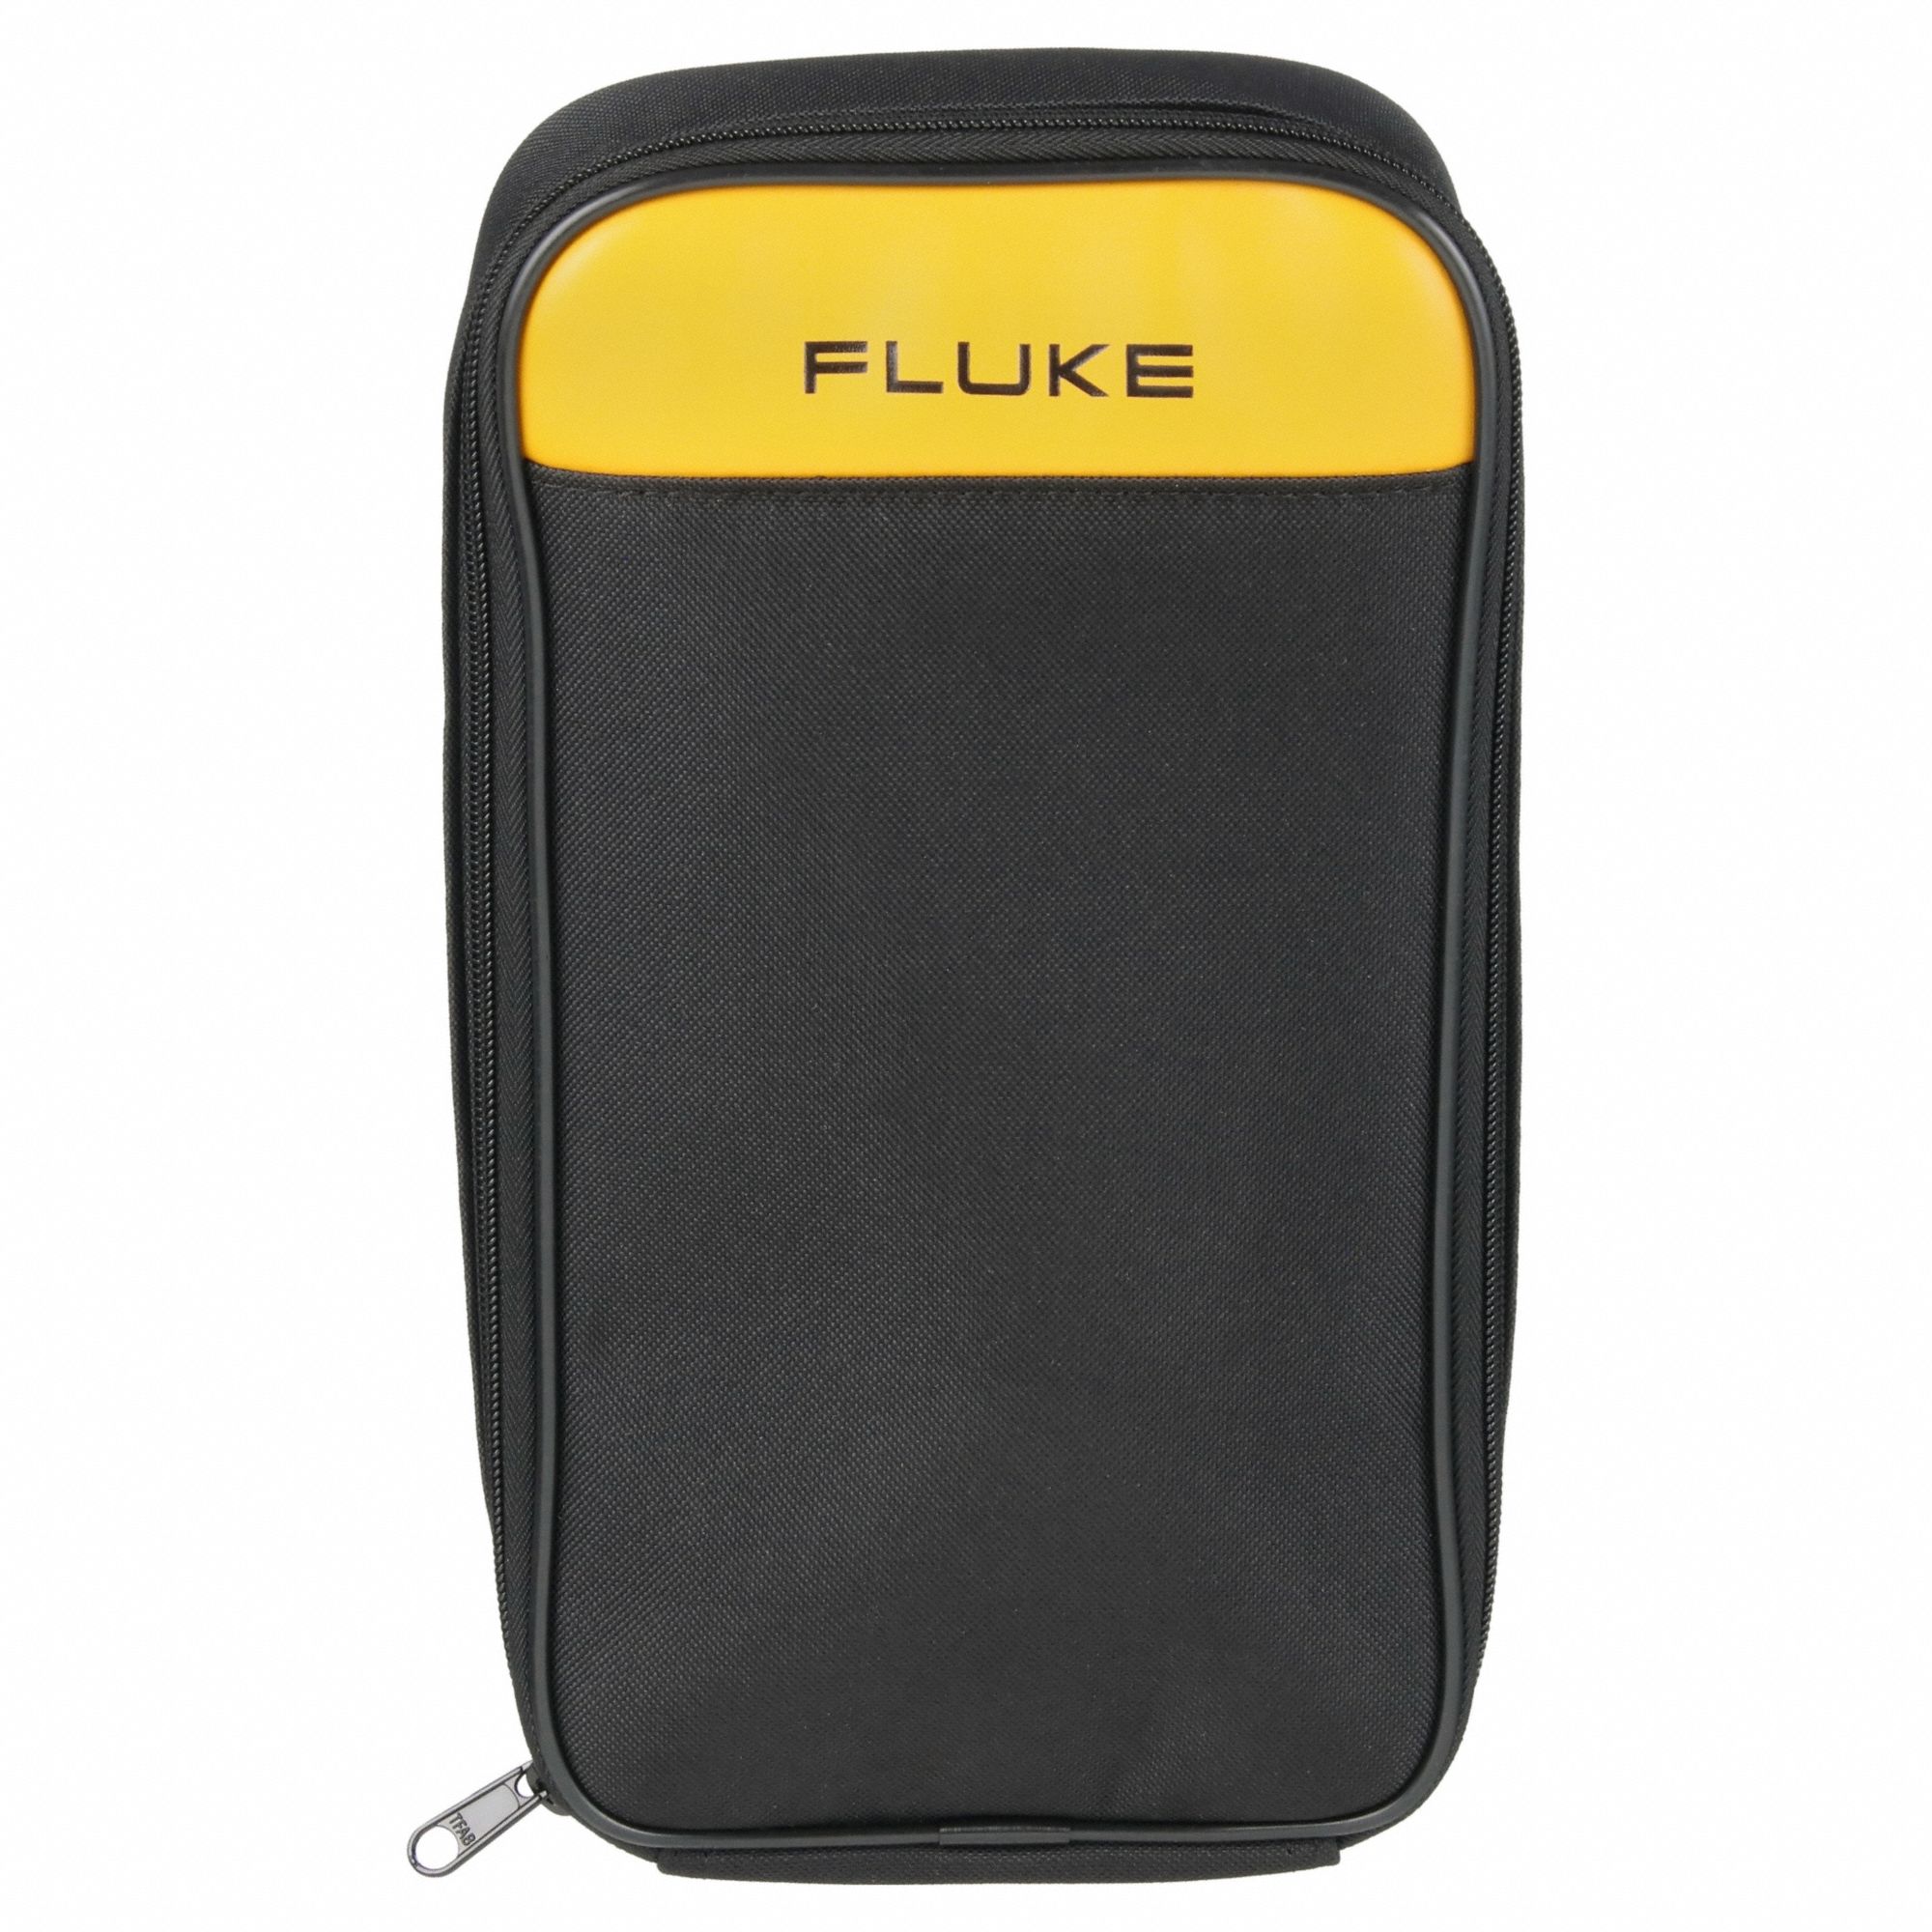 Fluke C150 Soft Carrying Case for T90, T110, T130, T150 Two Pole